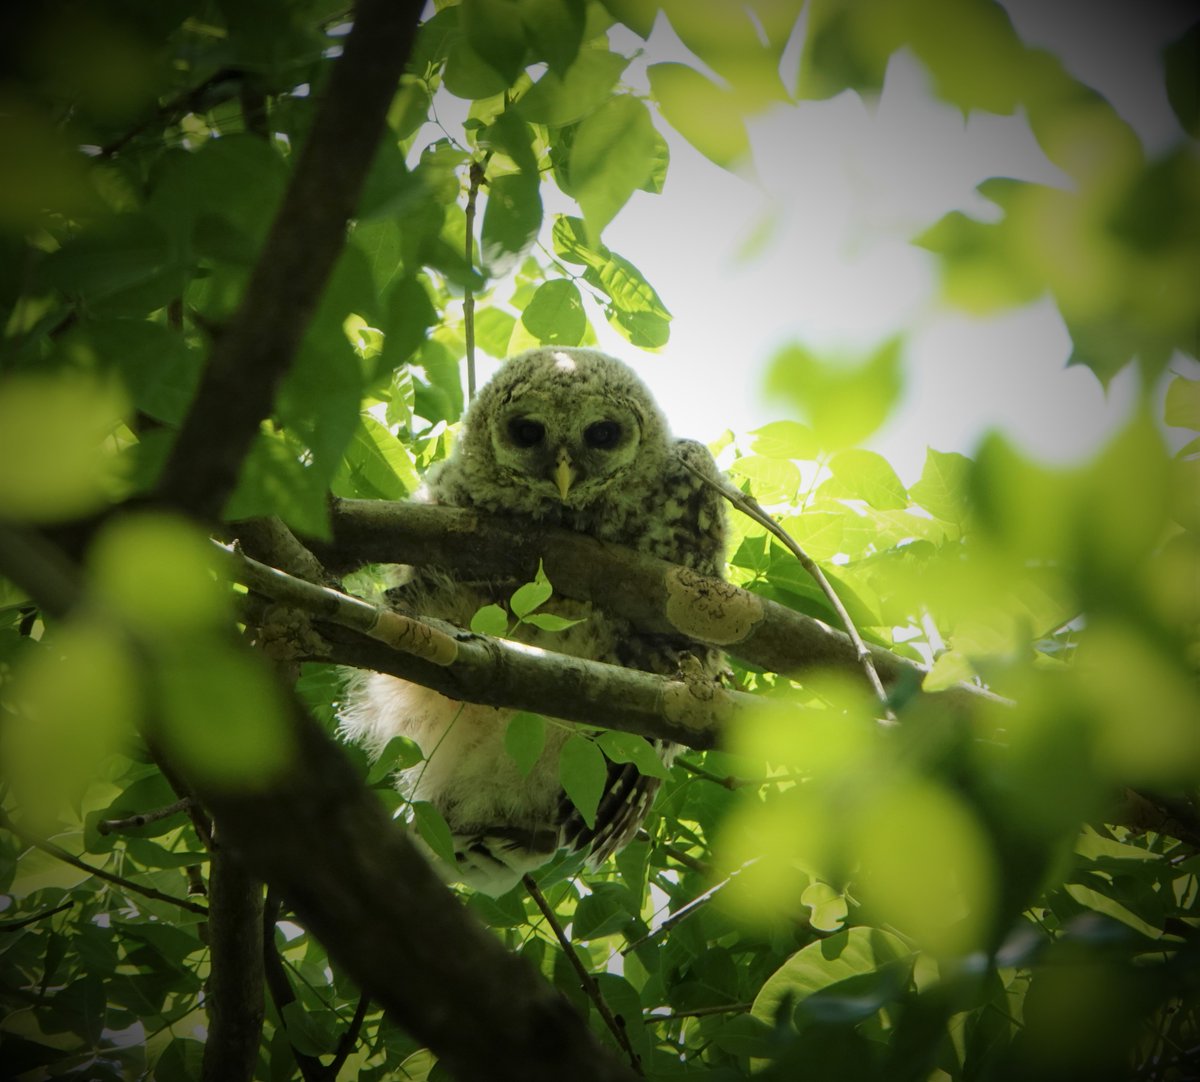 Baby owl sitting here looking cute and adorable! 

#babyowl
#photooftheday
#nature
#owls 
#birds